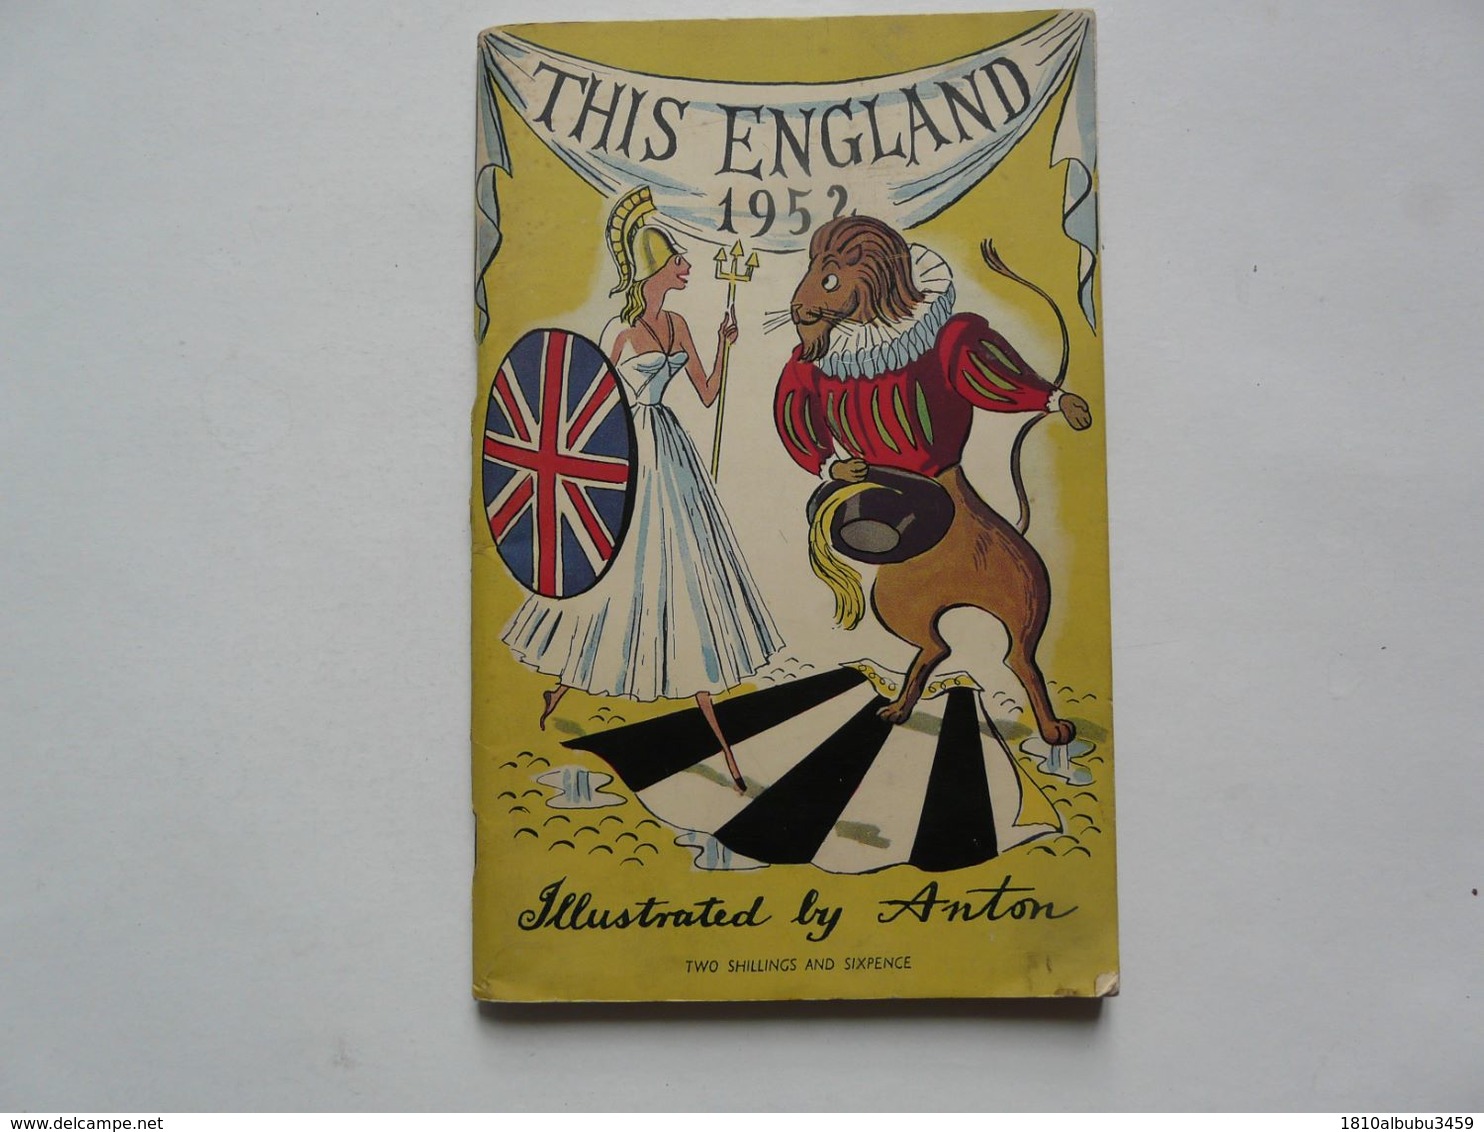 THIS ENGLAND 1952 - ILLUSTRATED BY ANTON - Culture